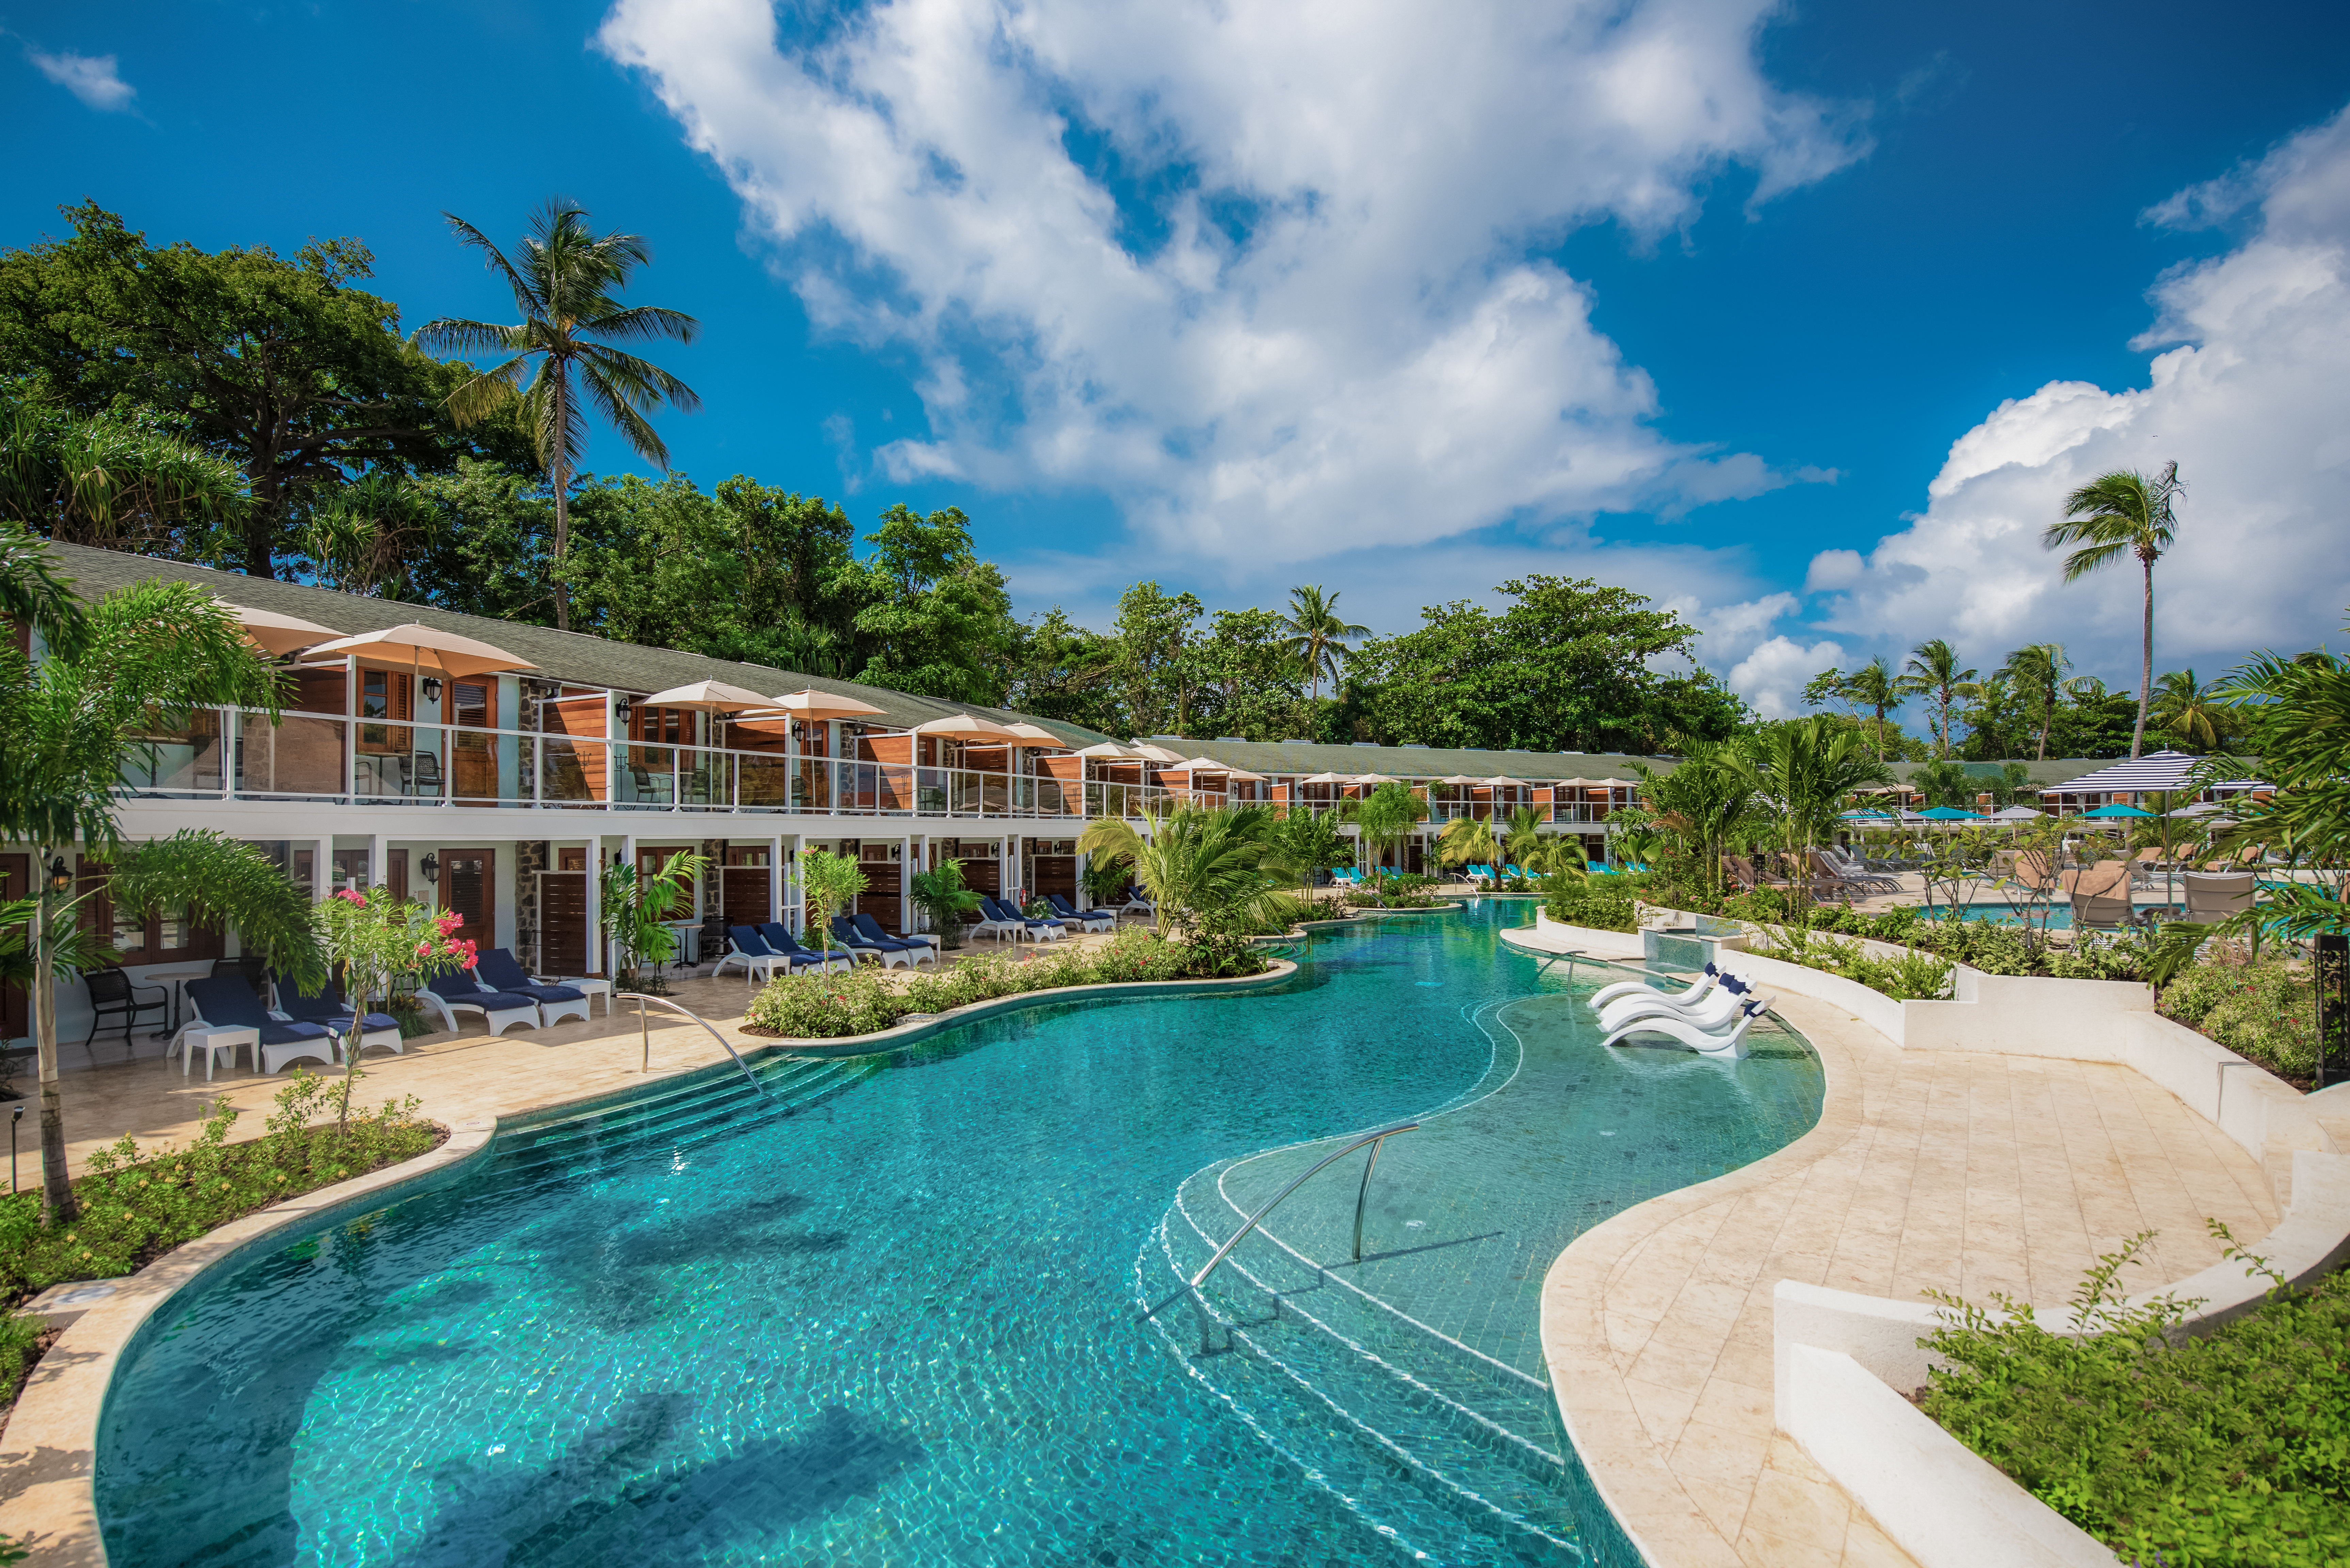 Top Travel Tips for Sandals Halcyon Beach: A Sandals Staff Review